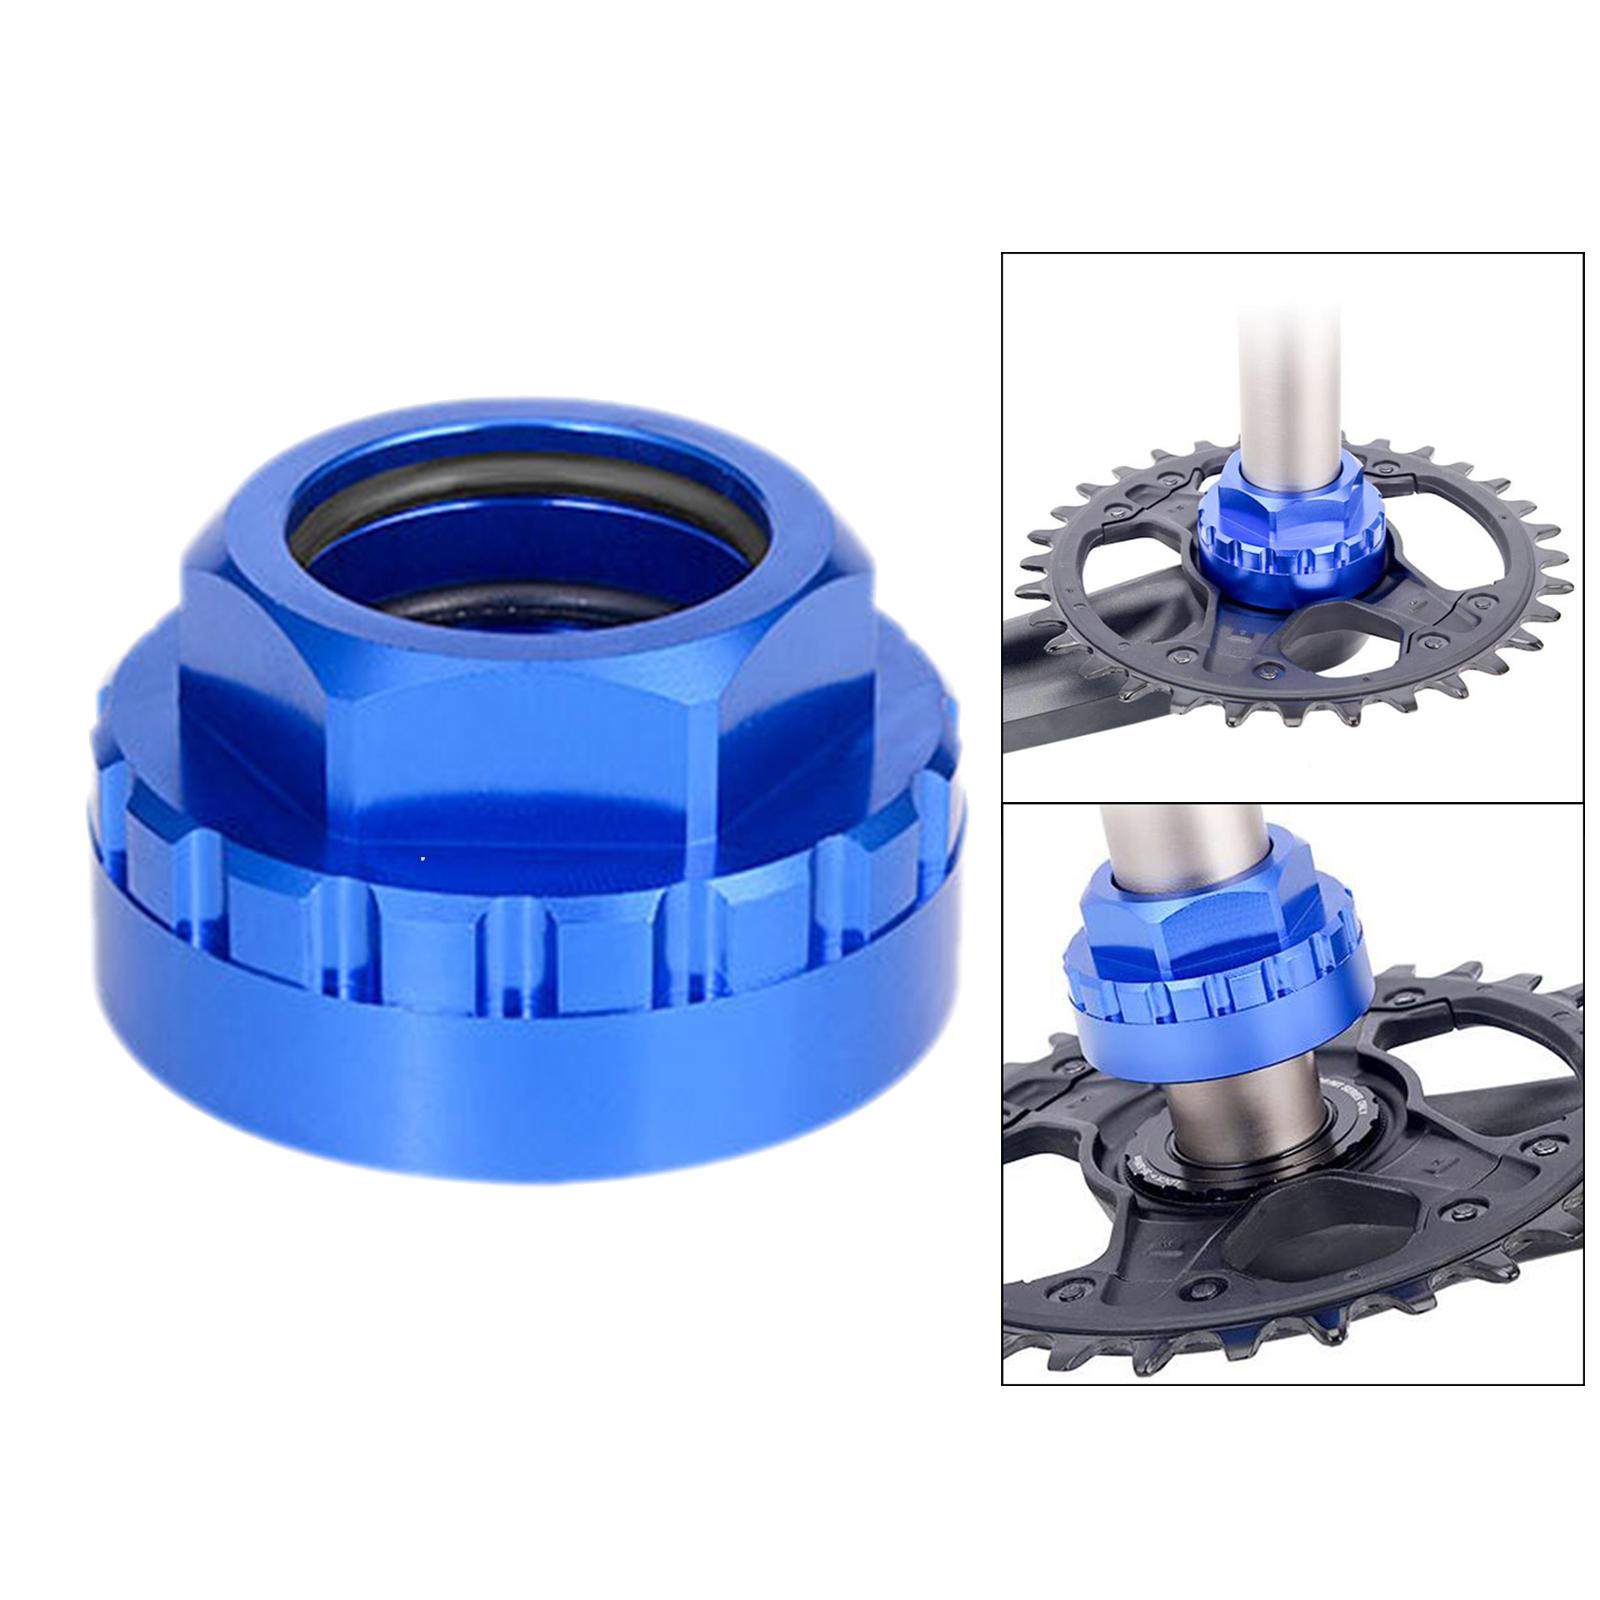 12-Speed Chainring Lock Ring Road Bike Rotor Lockring Bottom Bracket Chainset Removal Installation Tool Bicycle Cycle Equipment for Shimano M7100